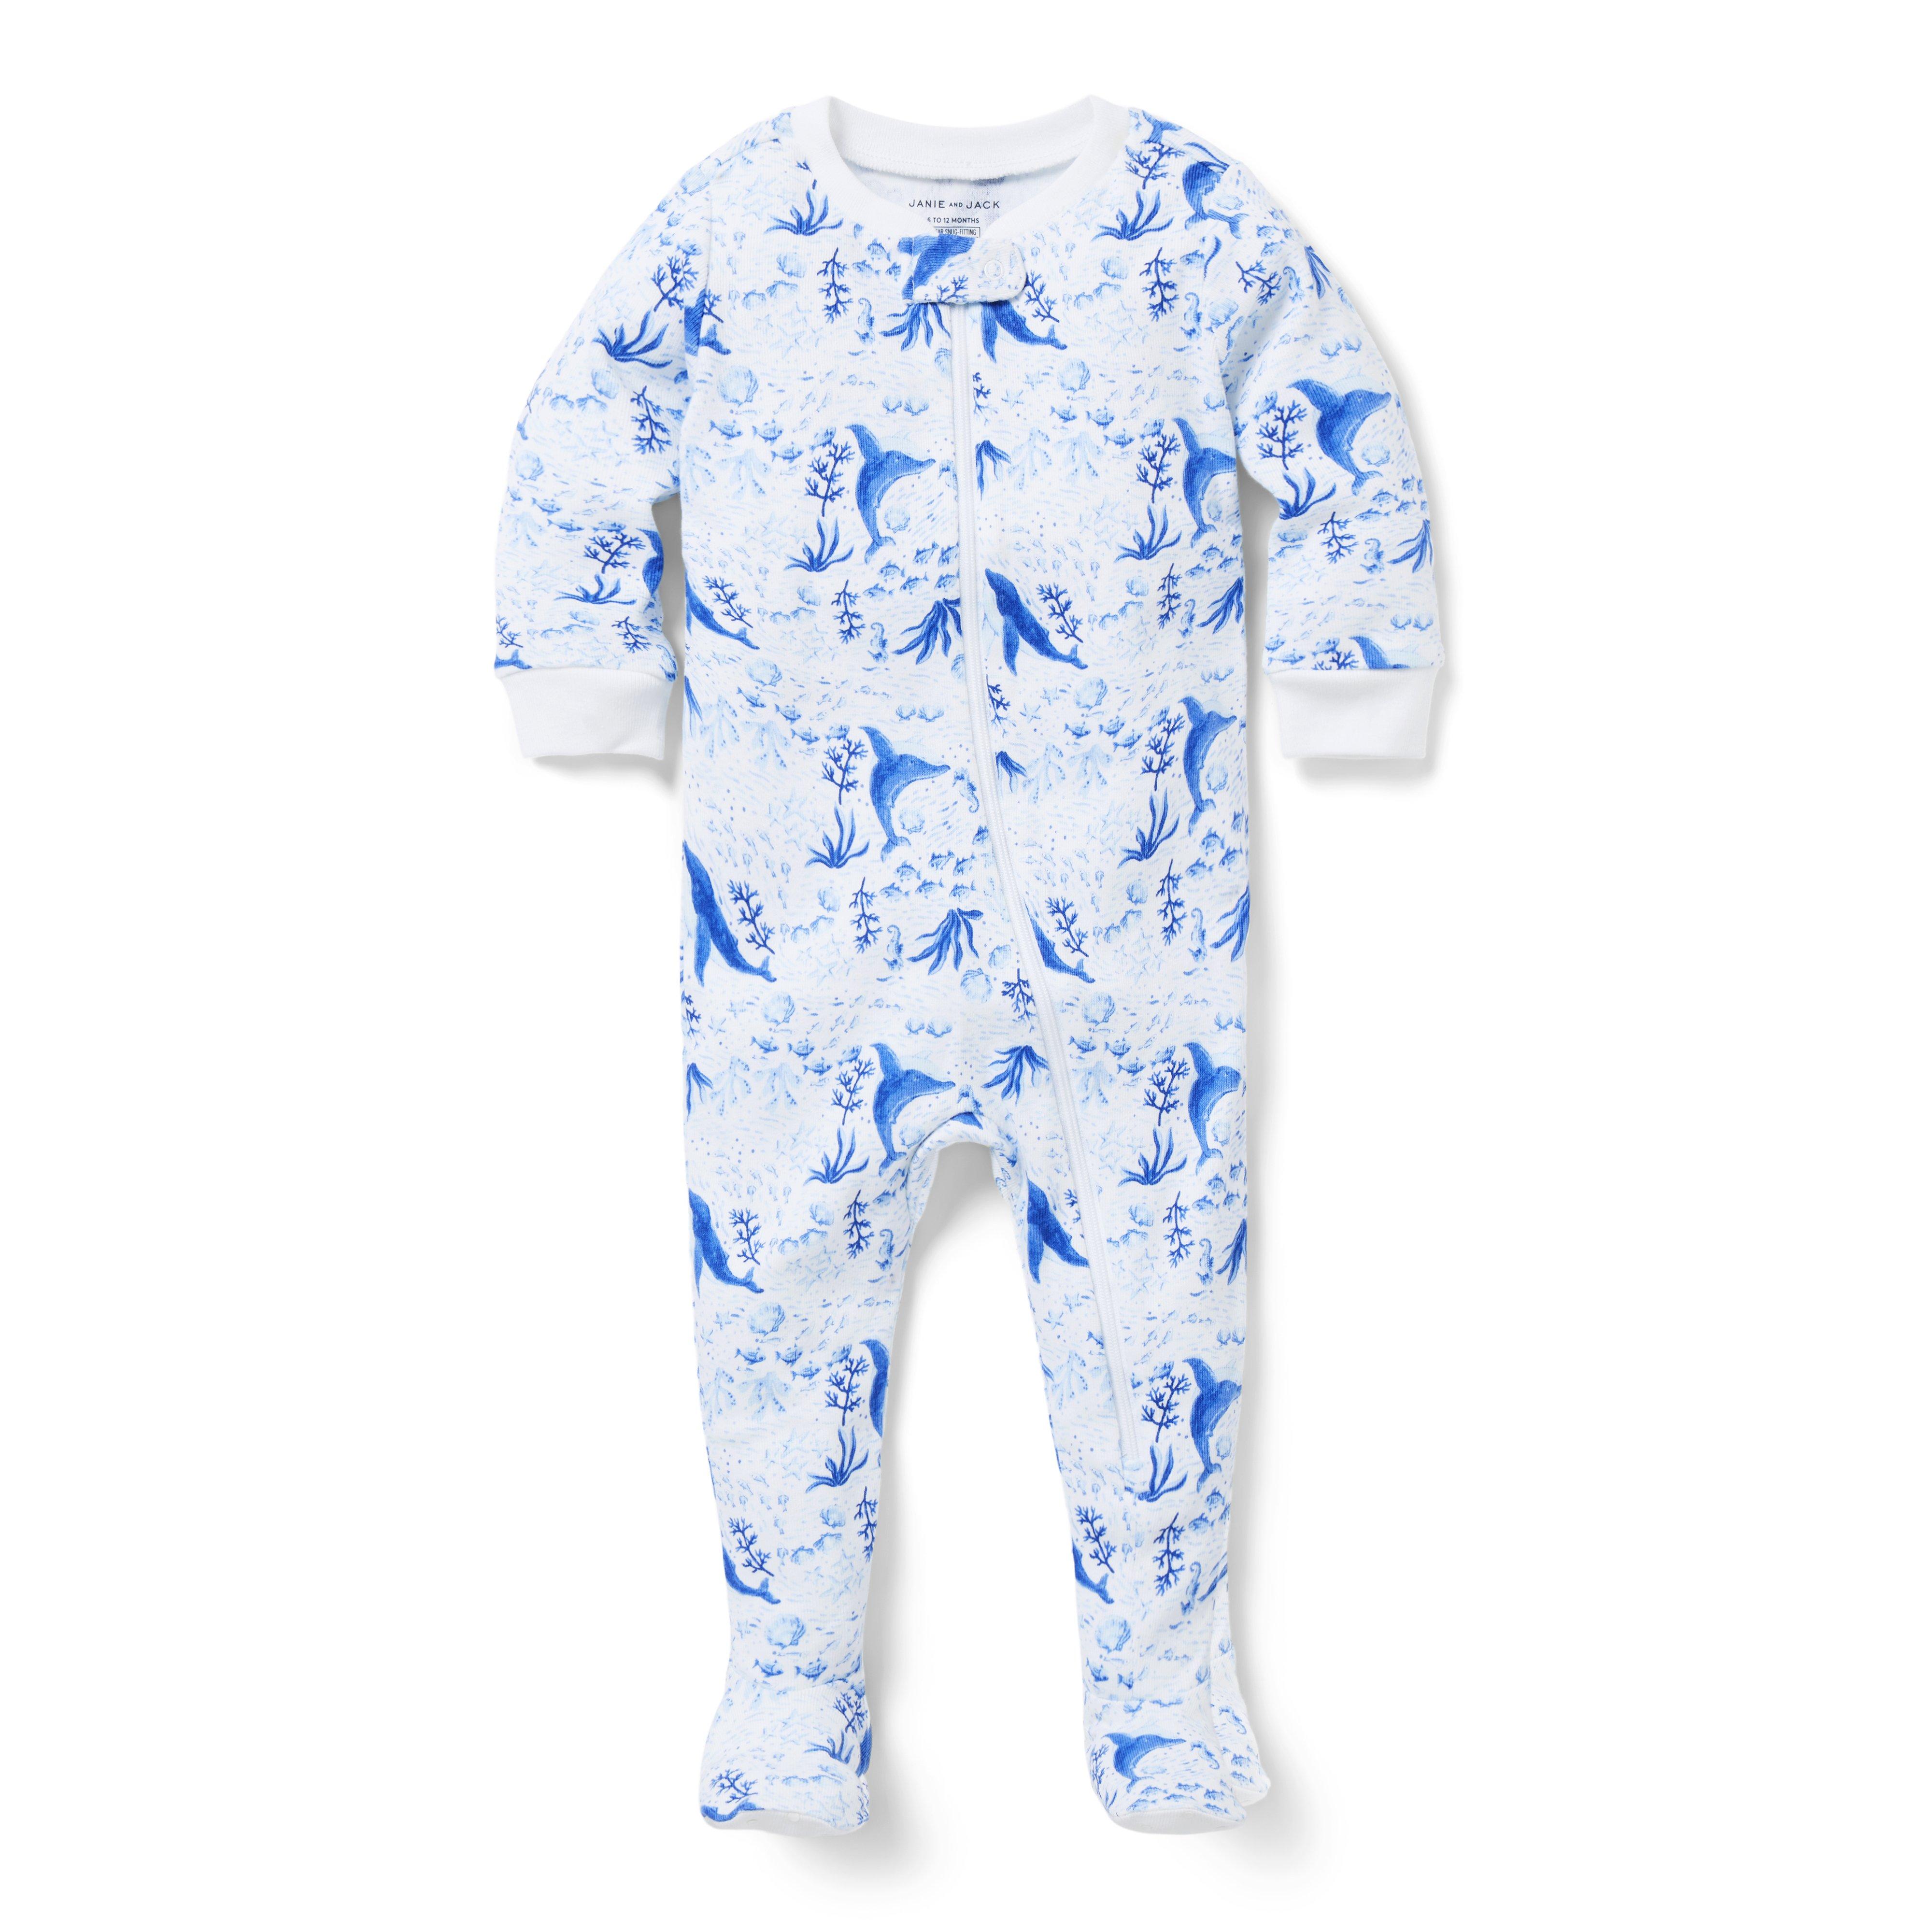 Baby Good Night Footed Pajama in Whale Wonder 